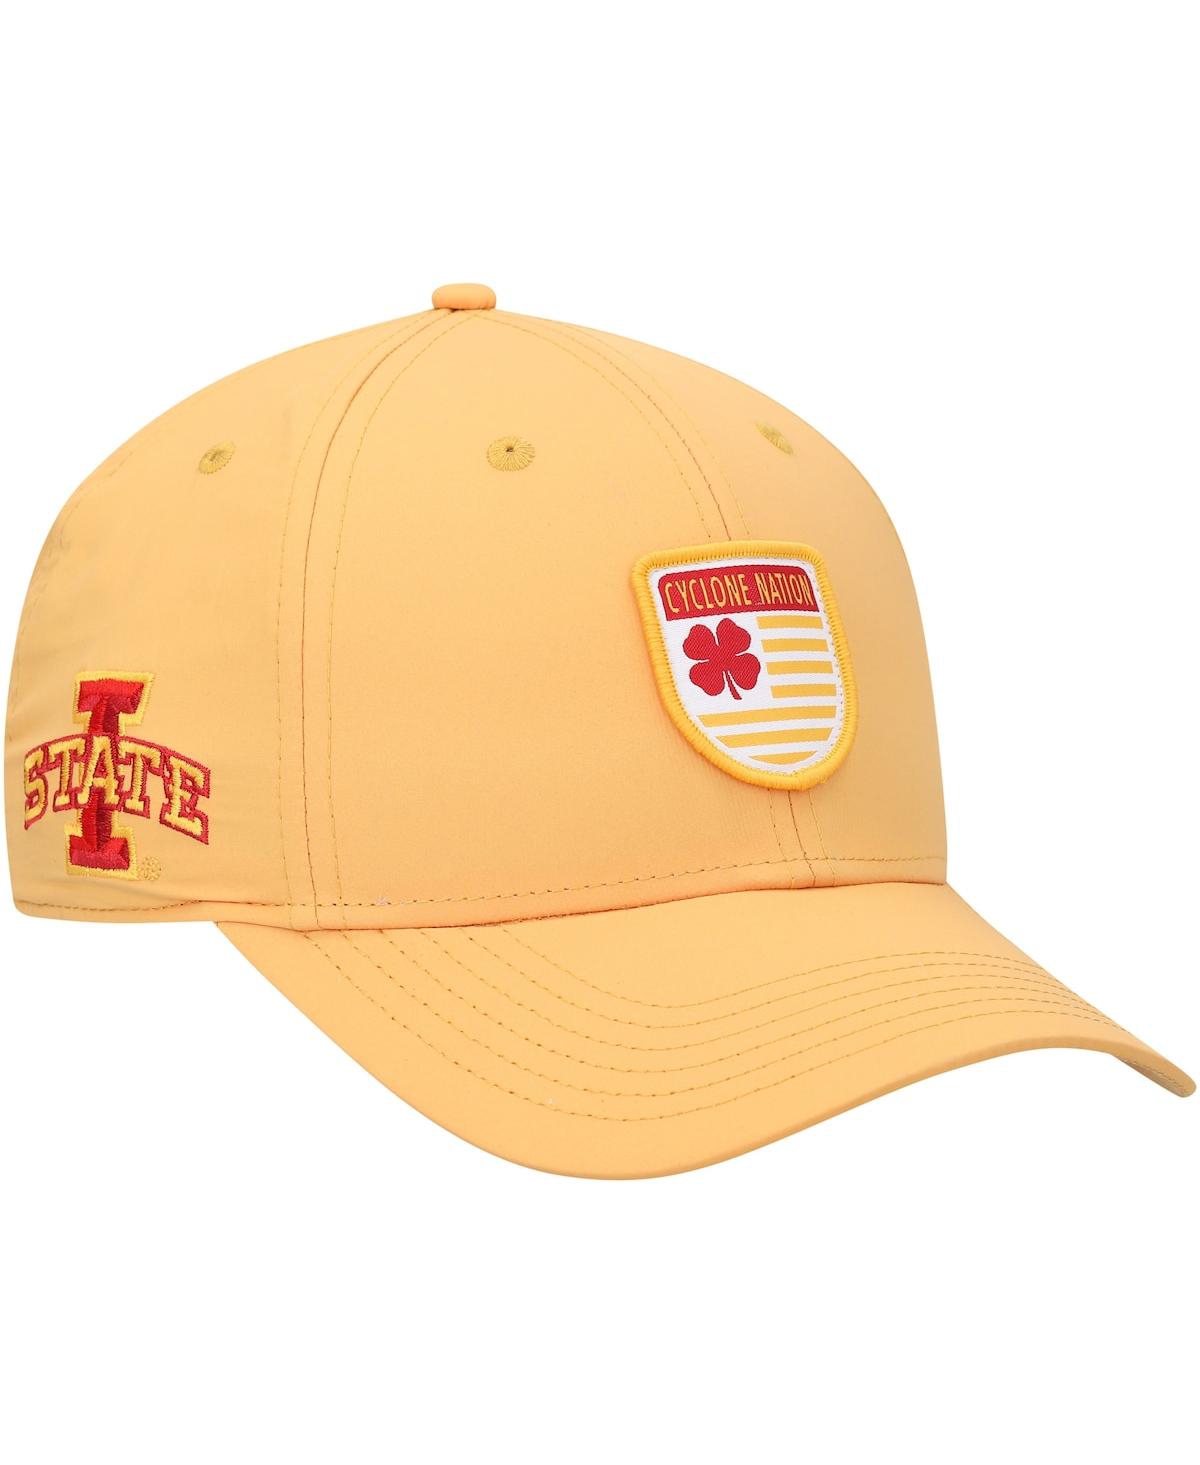 Men's Gold Iowa State Cyclones Nation Shield Snapback Hat - Gold